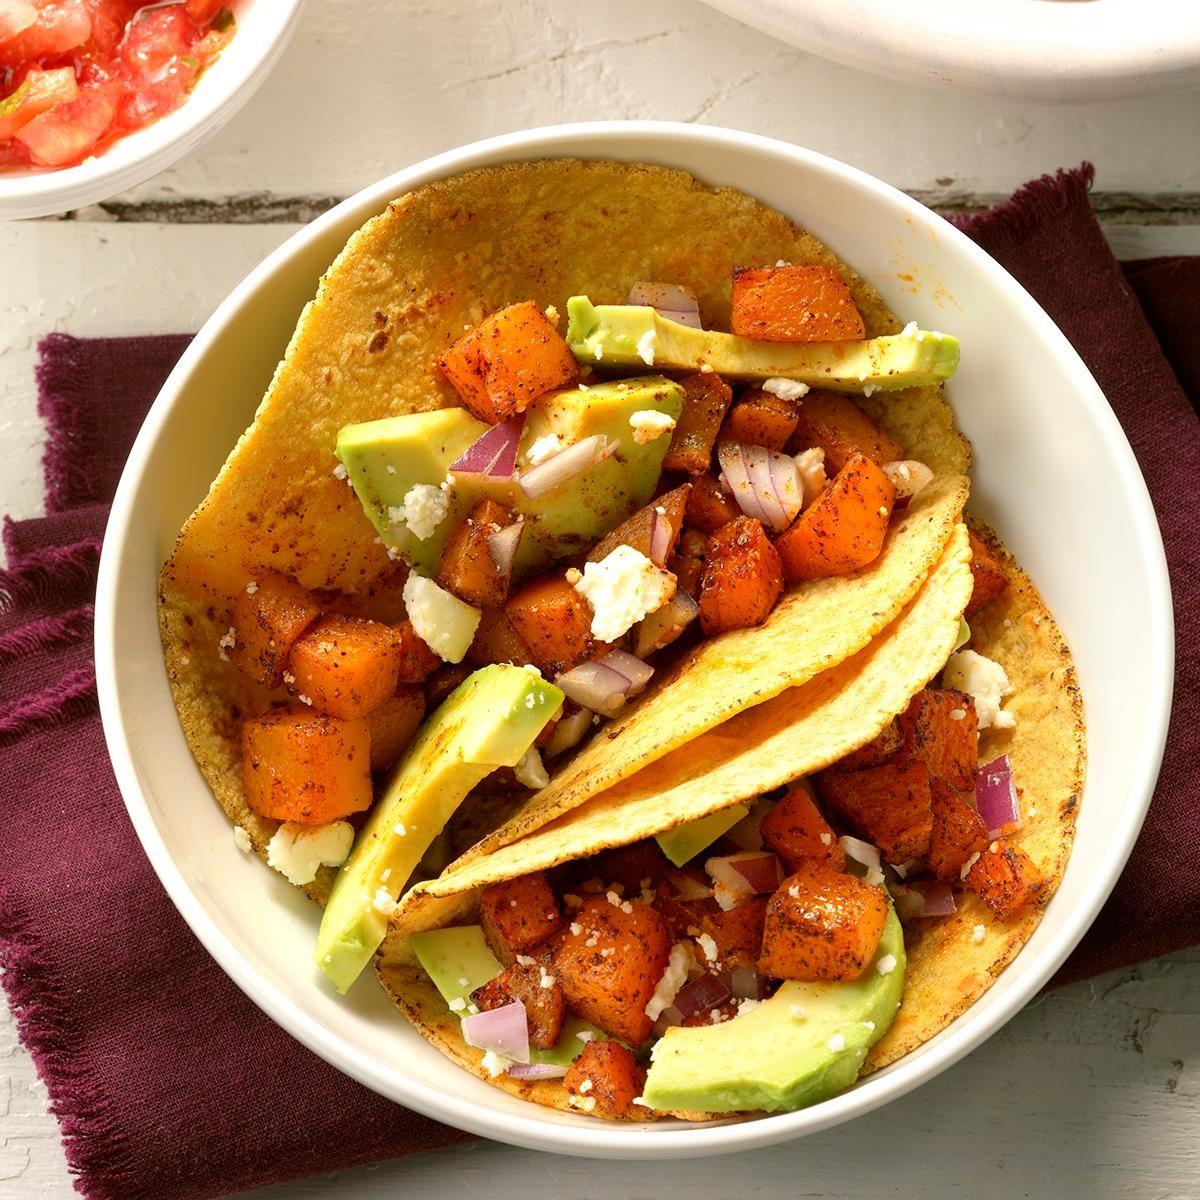 Day 26: Roasted Butternut Squash Tacos